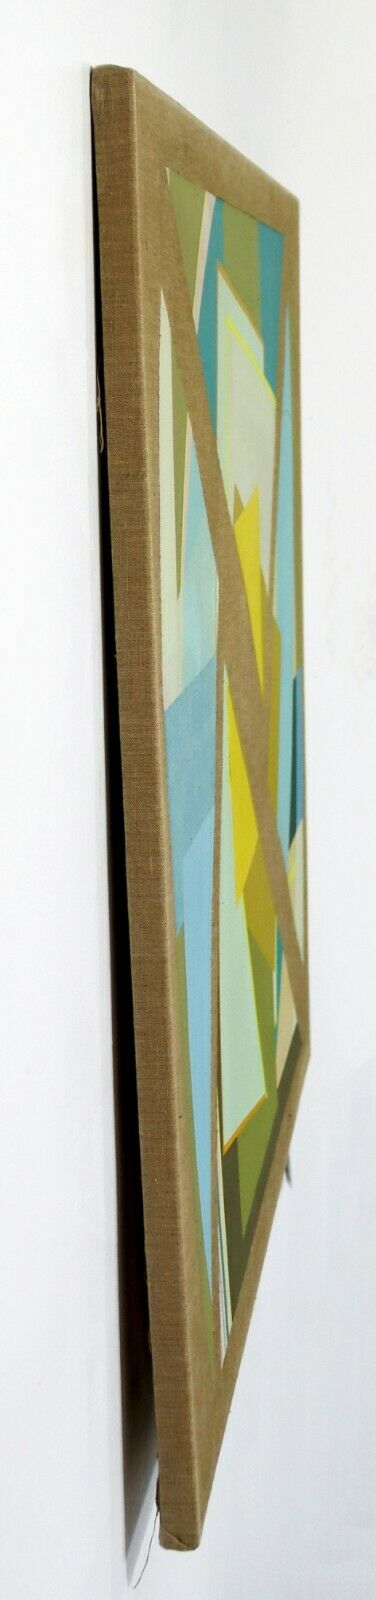 Modernist Gunda Hass Signed Acrylic Painting on Canvas Turquoise Yellow 2010s